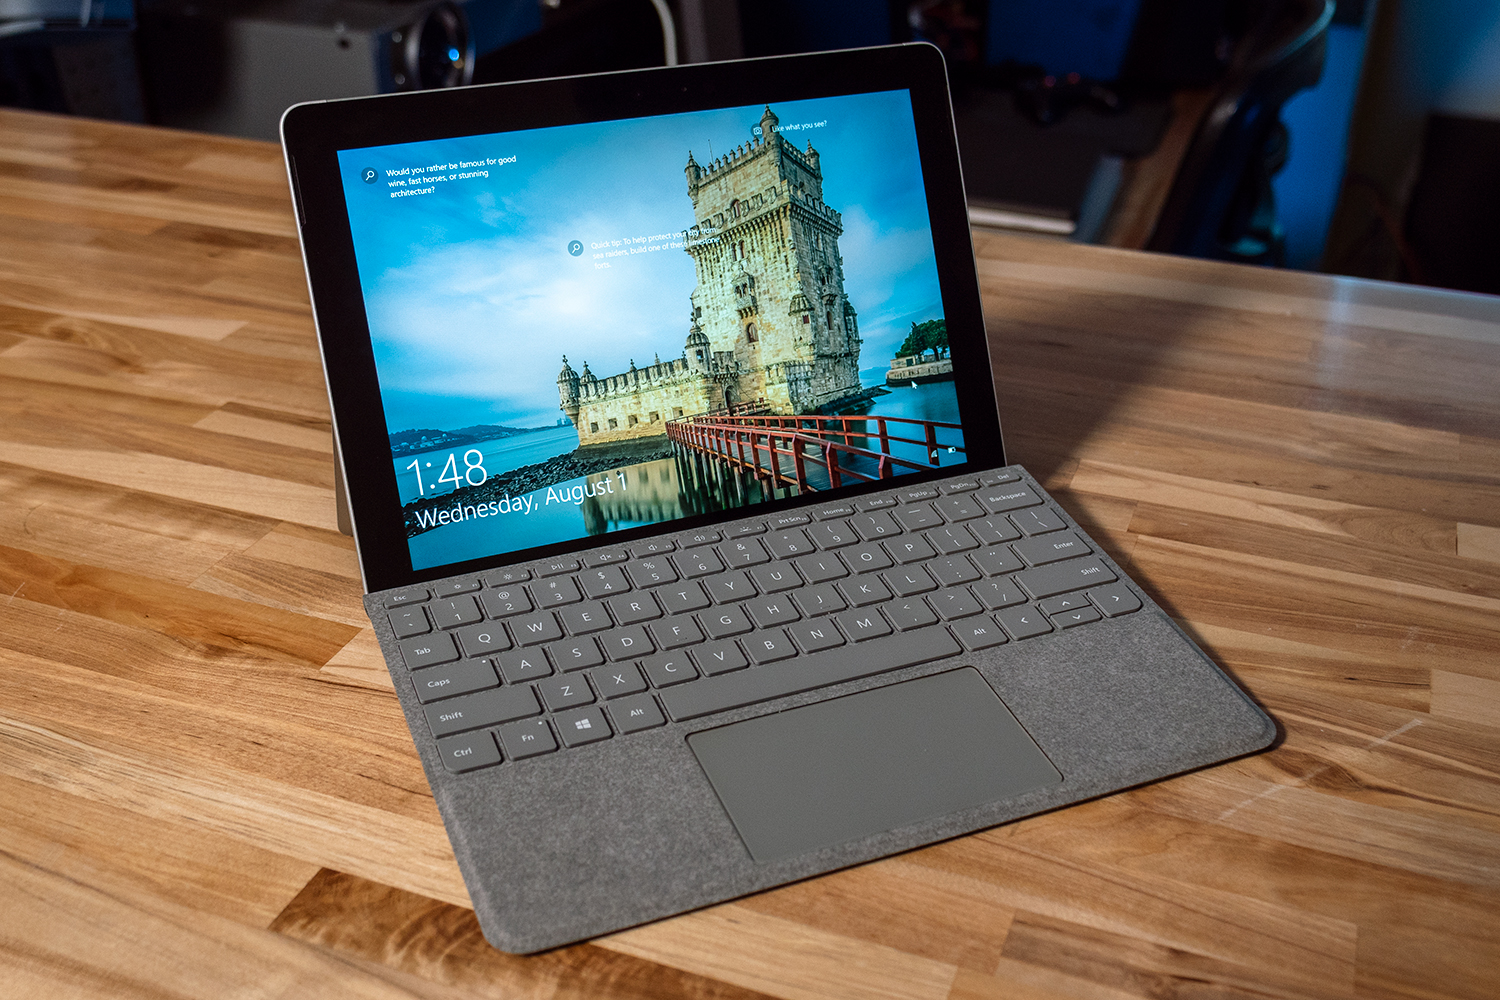 Microsoft Surface Go review: This shrunken-down Surface is fun and